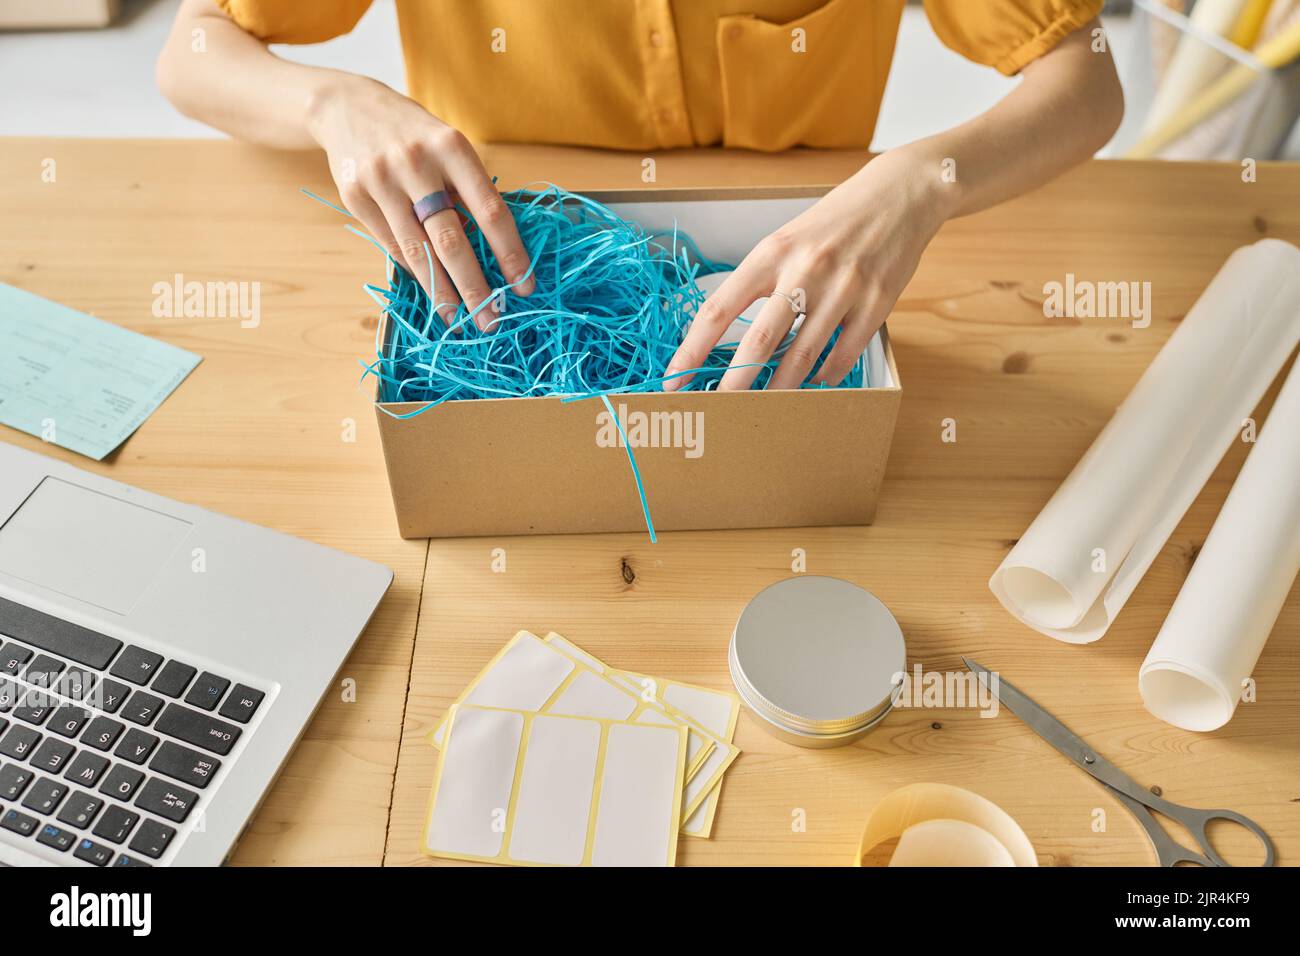 High angle view of young woman working with online order to pack goods in cardboard box Stock Photo